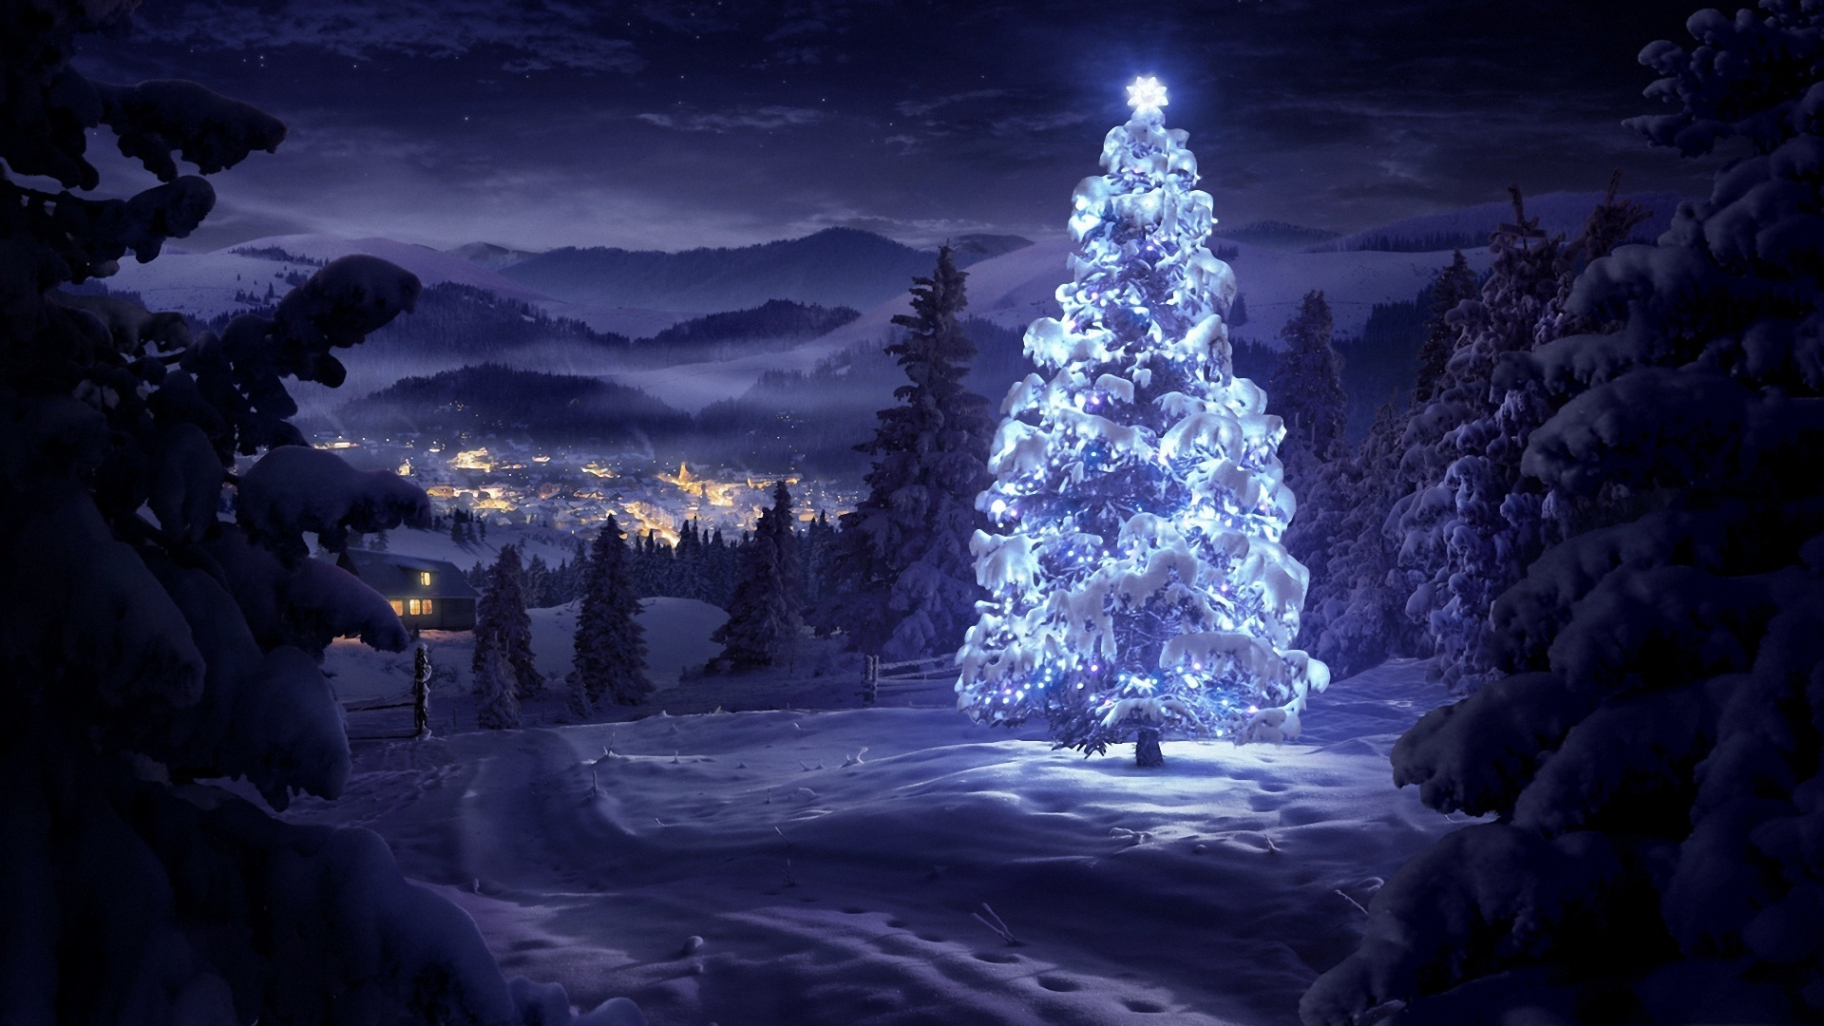 + Christmas HD Wallpapers and Backgrounds